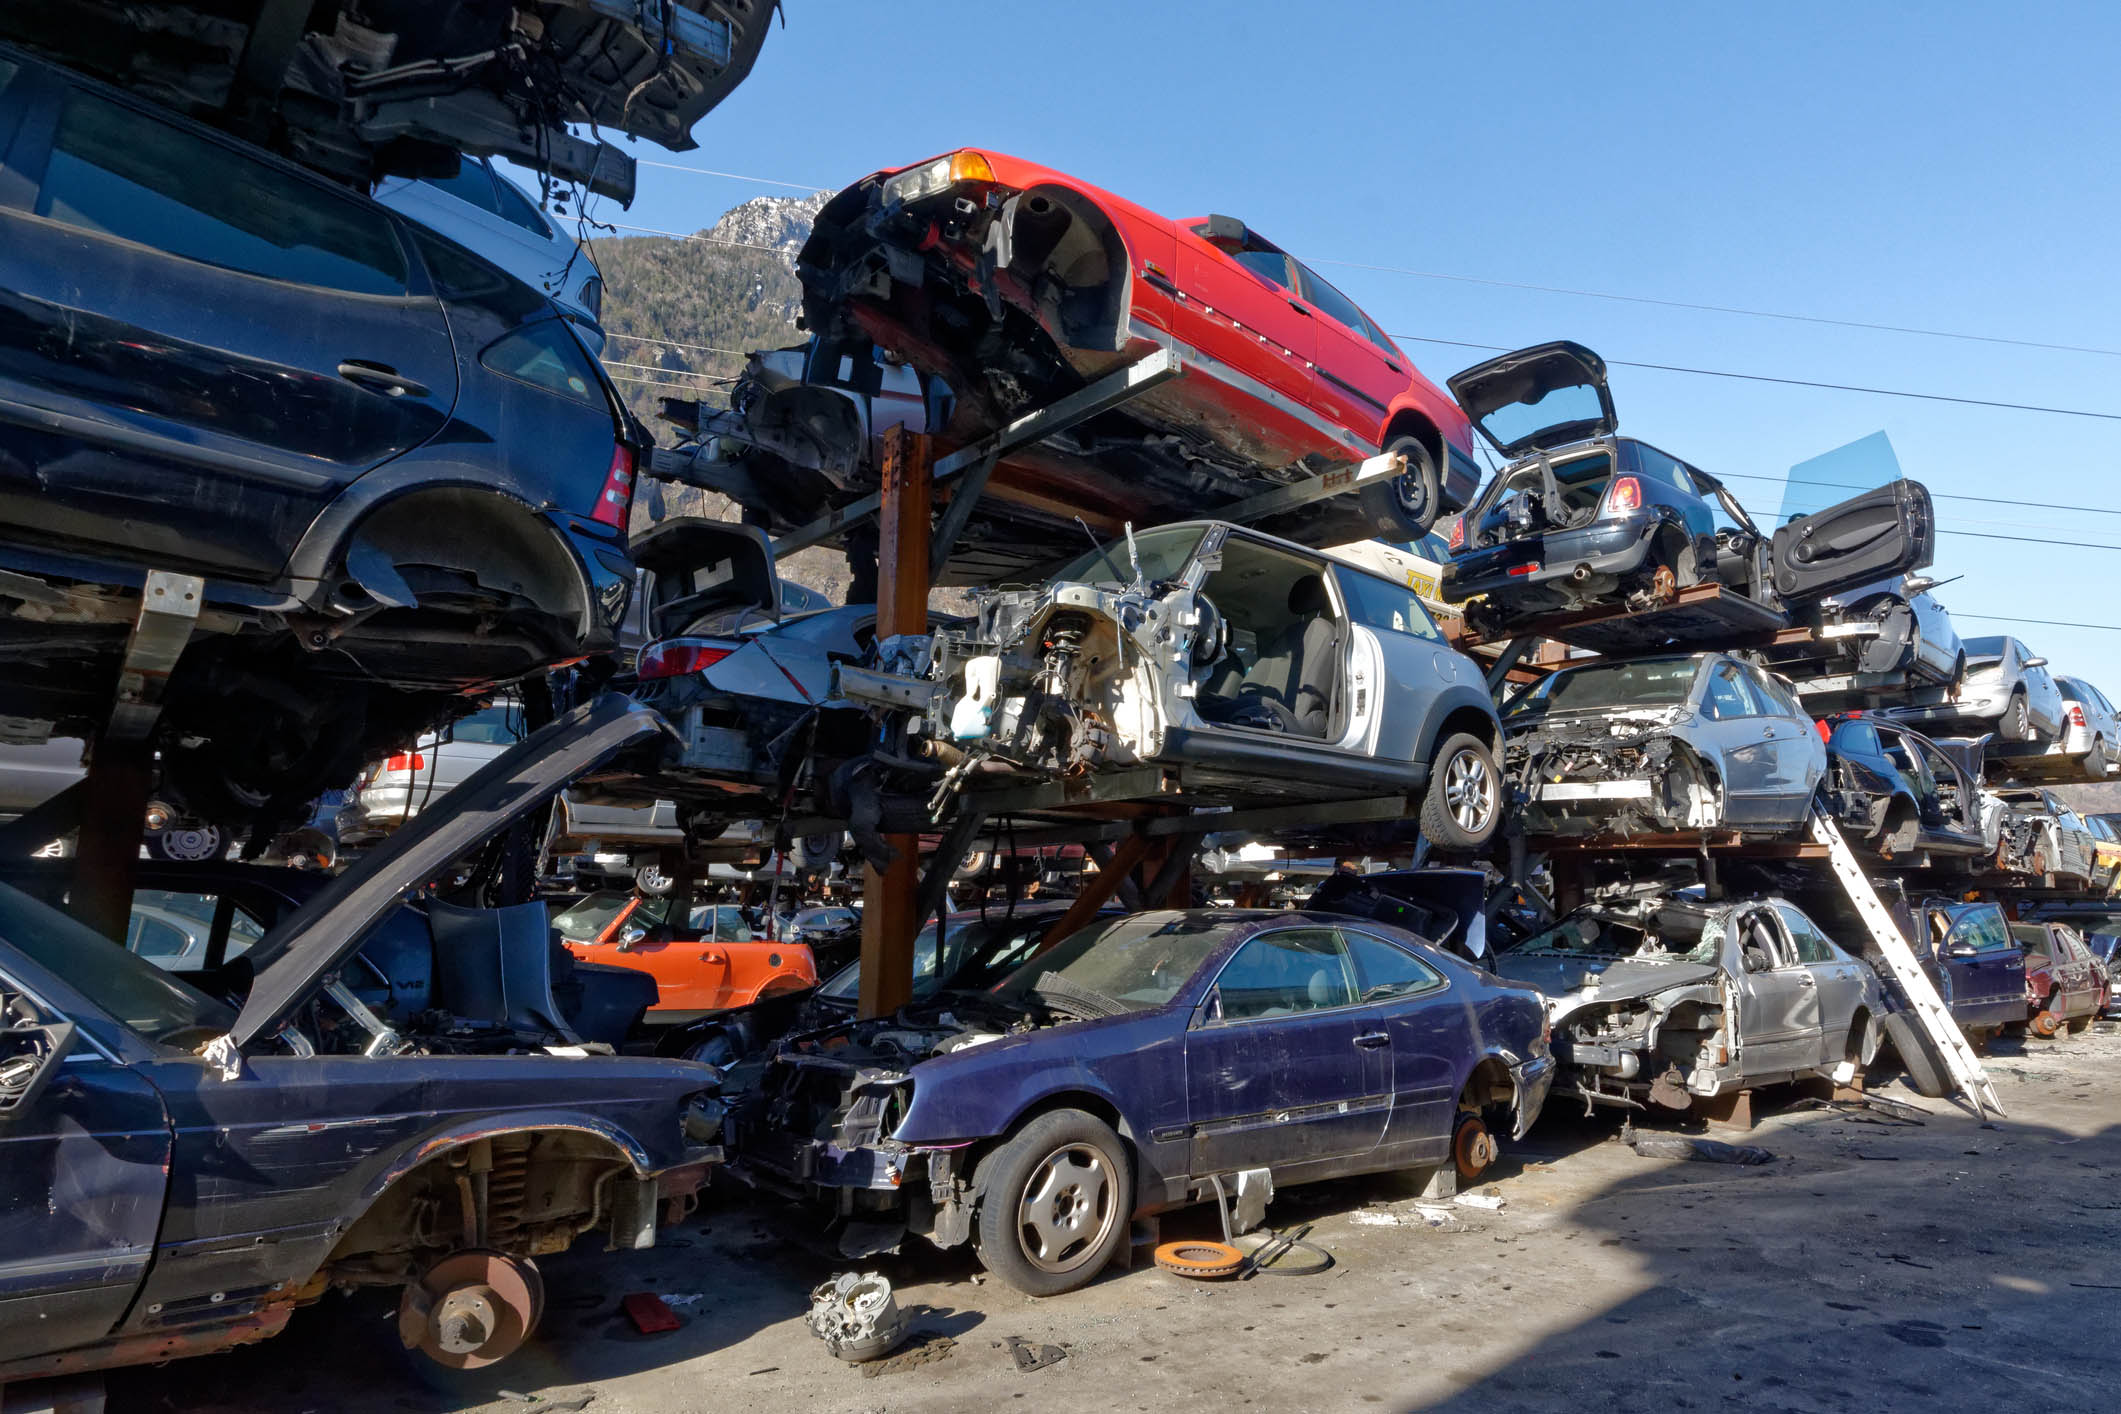 Valais, Switzerland, 21.02.2019, Recycling of old,used, wrecked cars. Dismantling for parts at scrap yards and sending for remelting